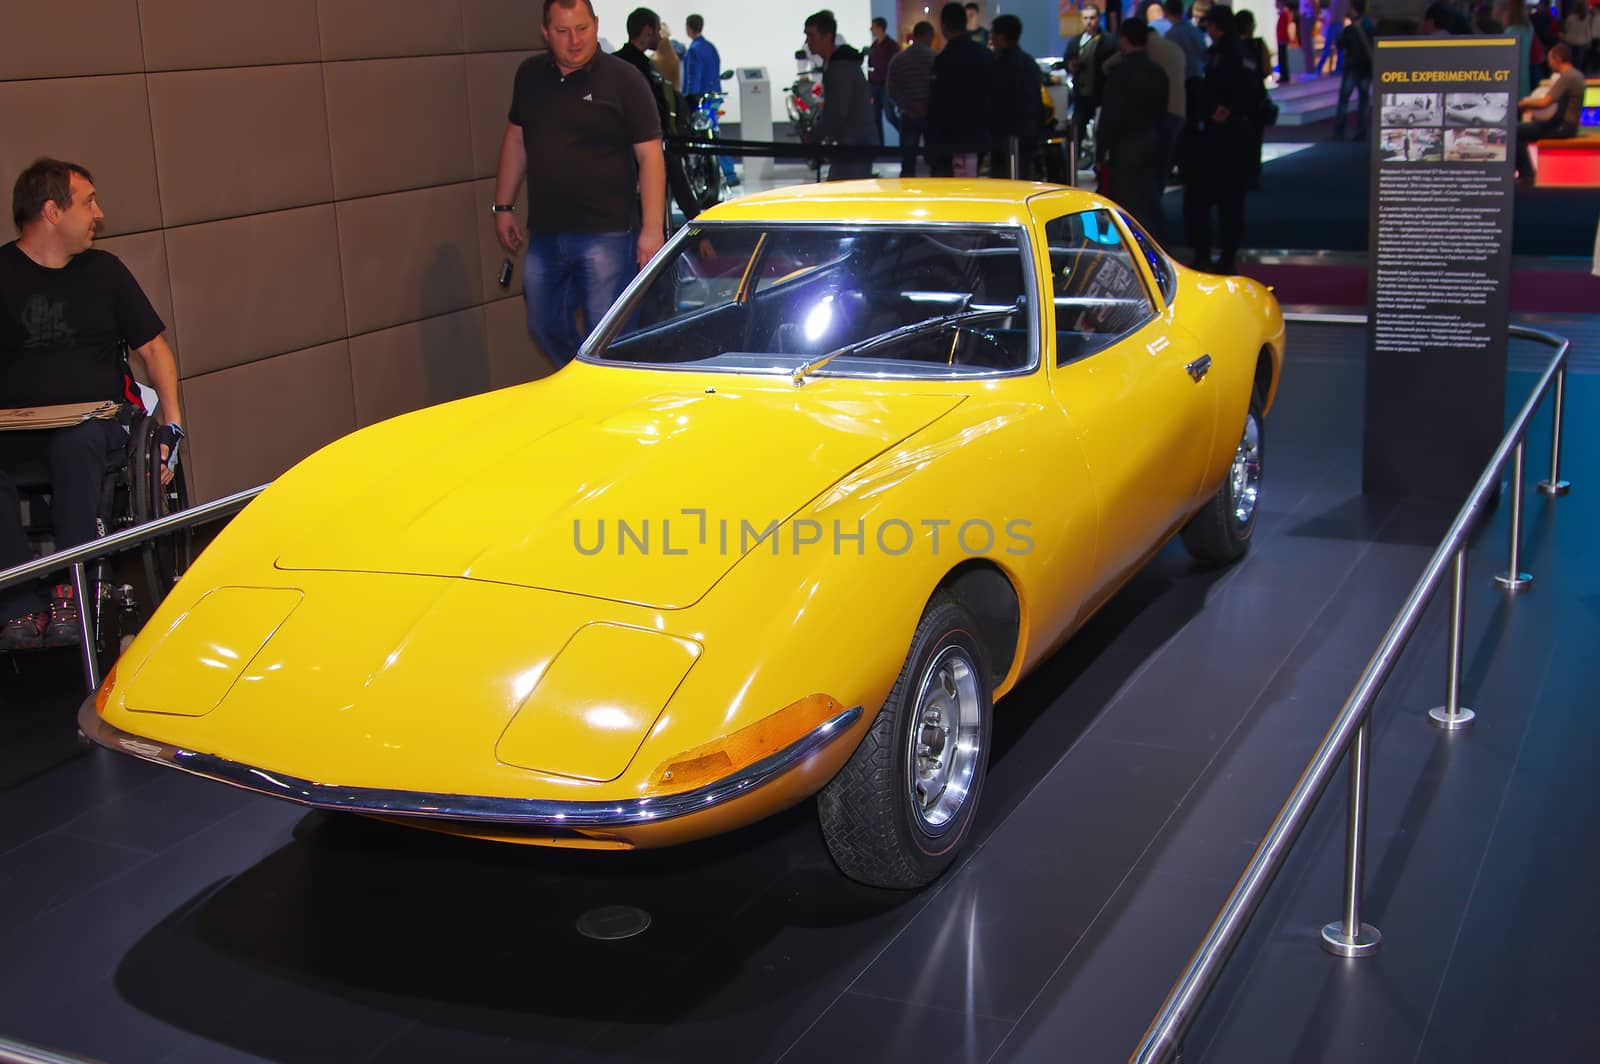 Moscow-September 2: Opel Experimental GT at the Moscow International Automobile Salon on September 2, 2014 in Moscow